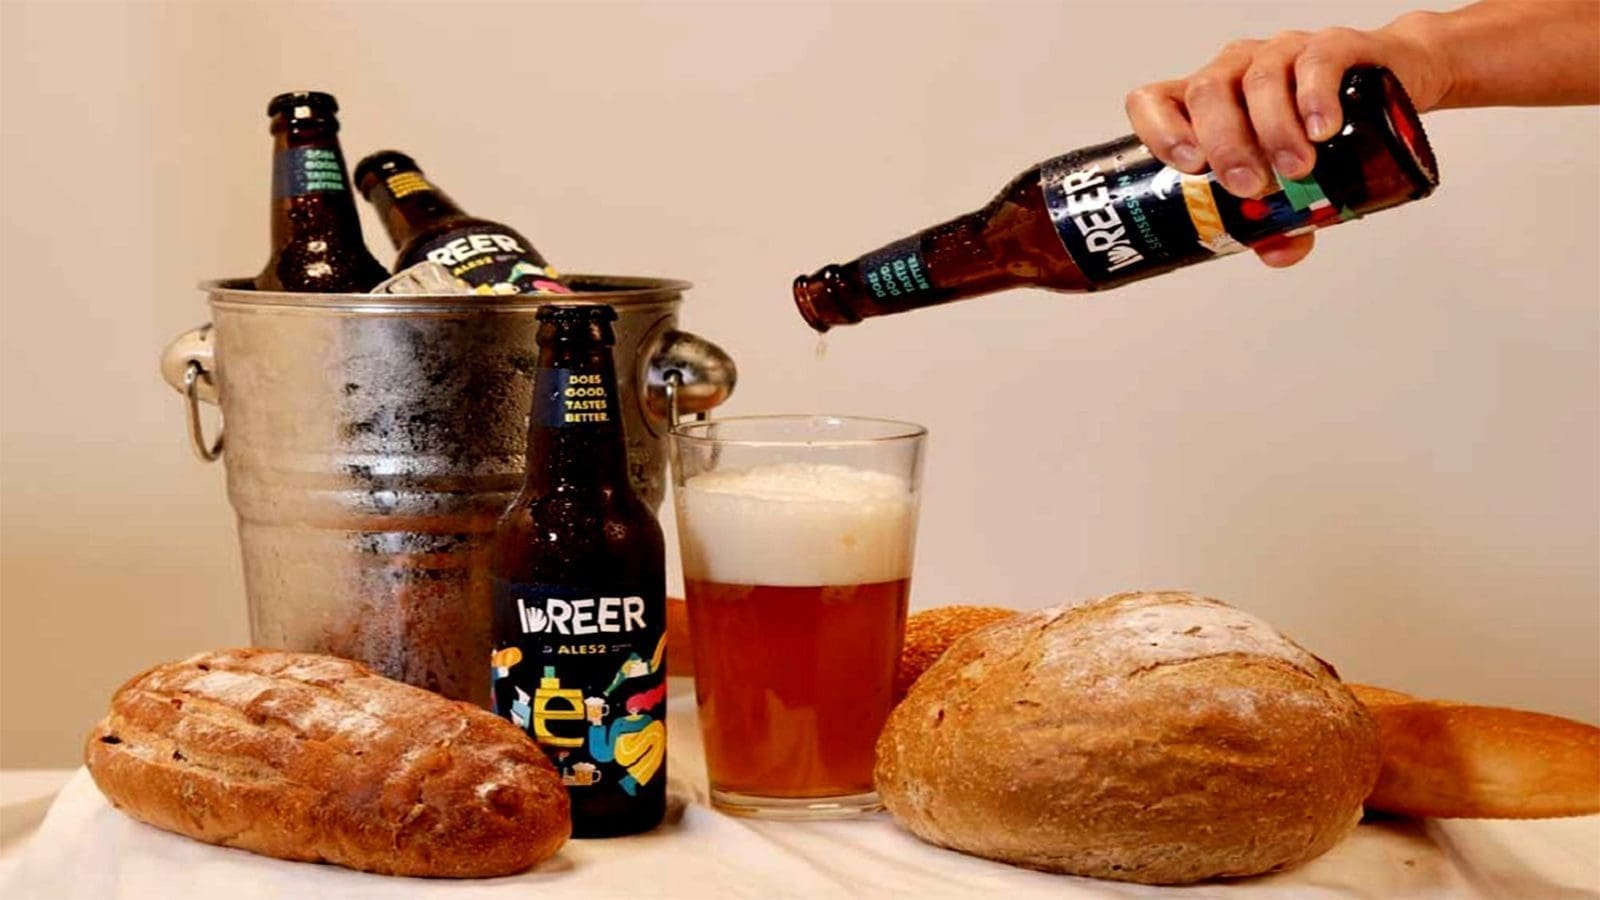 FSSAI to introduce new regulations for bread, beer